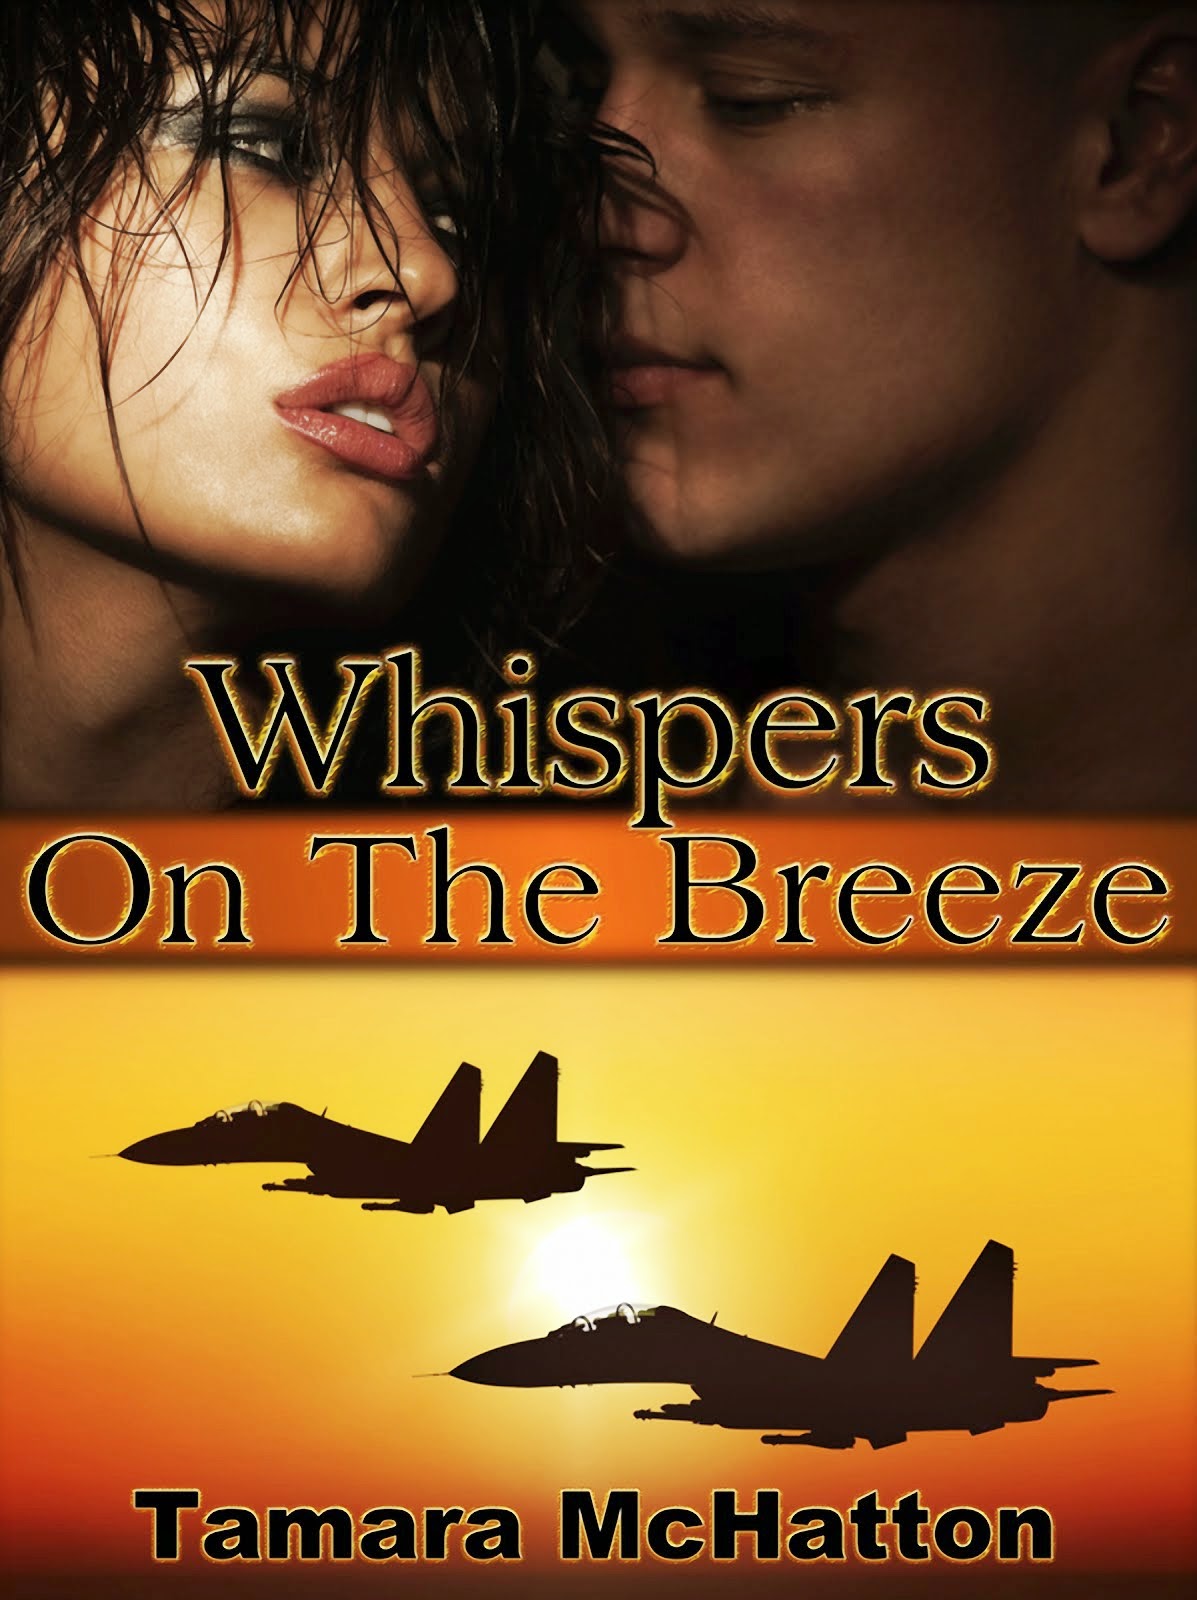 Whispers on the Breeze